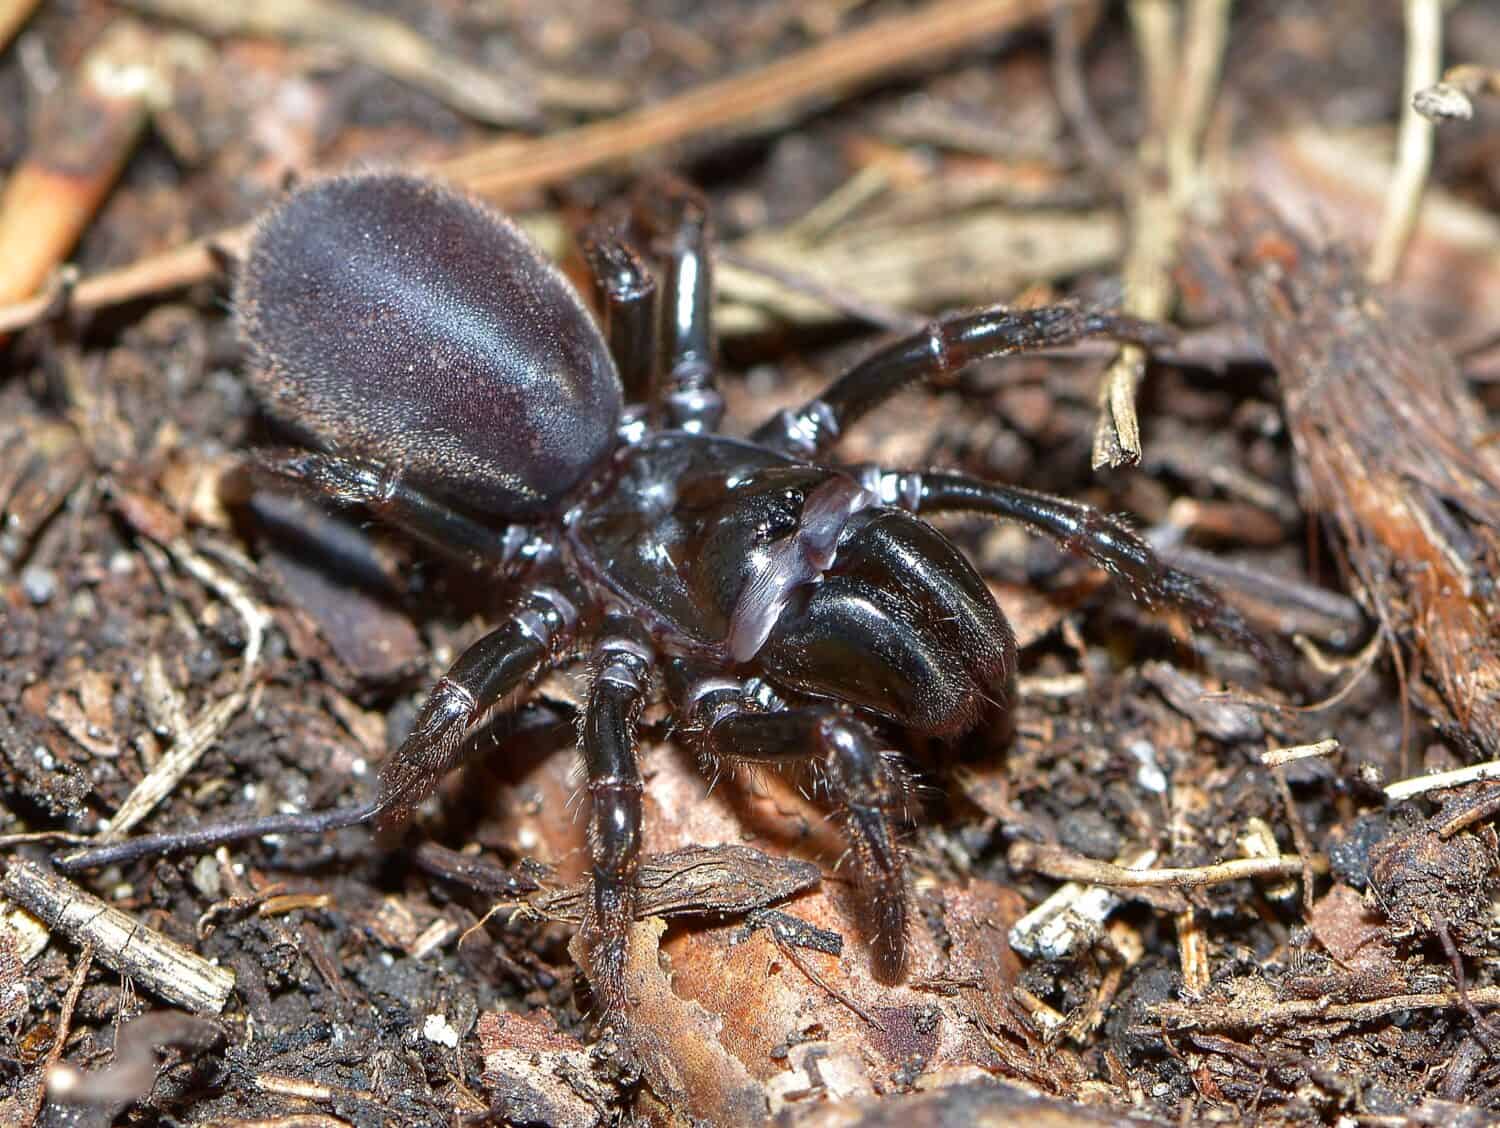 Closeup picture of the black European purseweb spiders Atypus piceus (Araneae: Atypidae), an atypical tarantula photographed in a heathland in southern Germany.